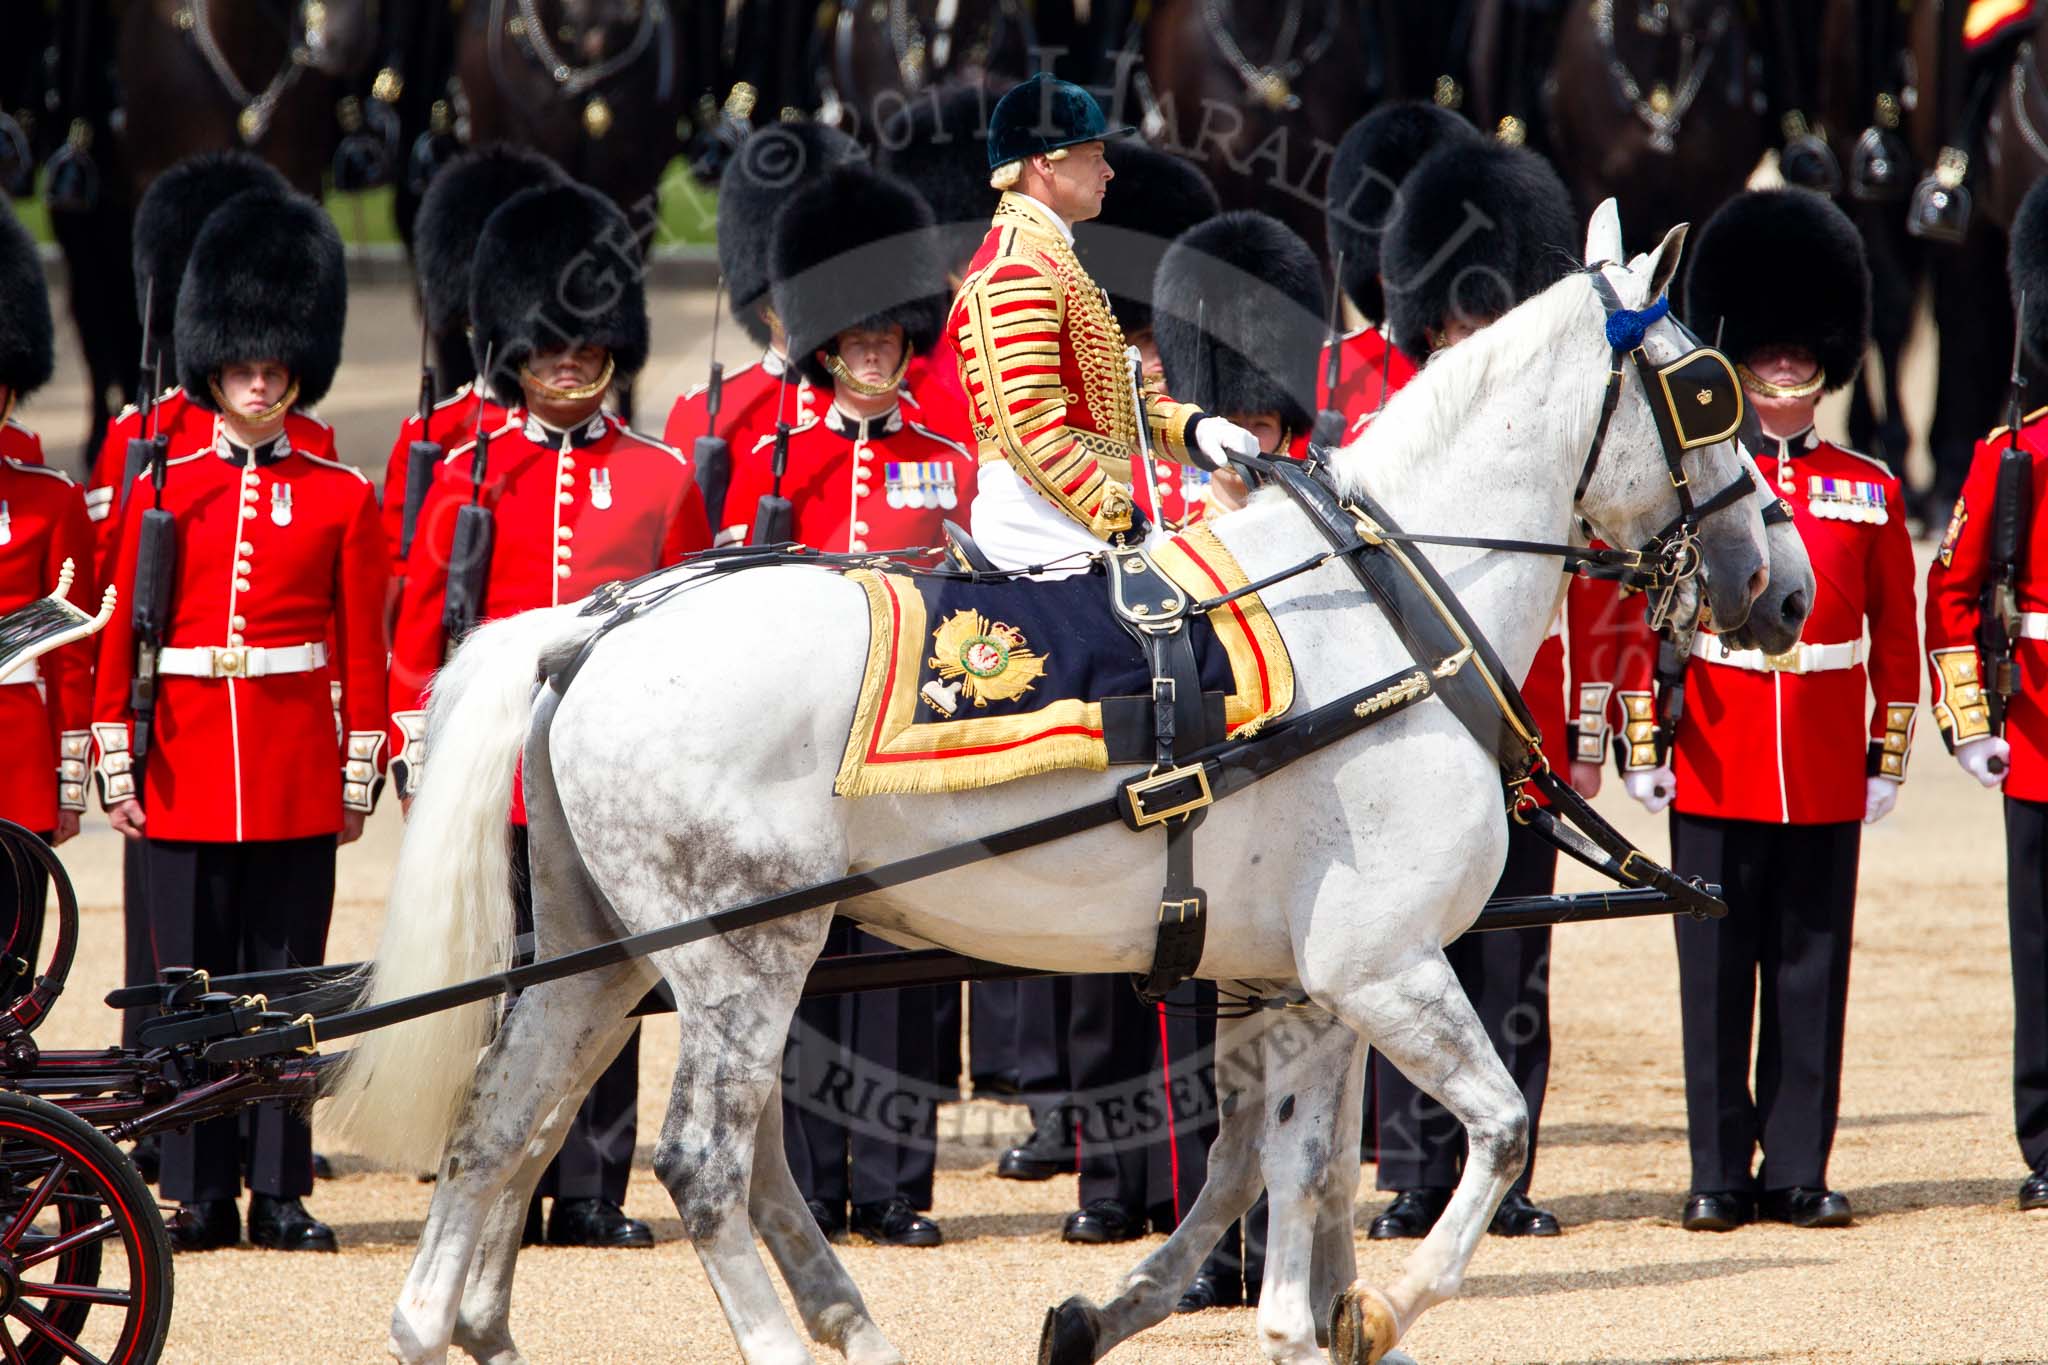 Trooping the Colour 2011: Jack Hargreaves, head coachman, during the Inspection of the Line. In the front, No. 2 Guard, 1B Company Scots Guards, and in the background the Mounted Band of the Royal Cavalry..
Horse Guards Parade, Westminster,
London SW1,
Greater London,
United Kingdom,
on 11 June 2011 at 11:03, image #154